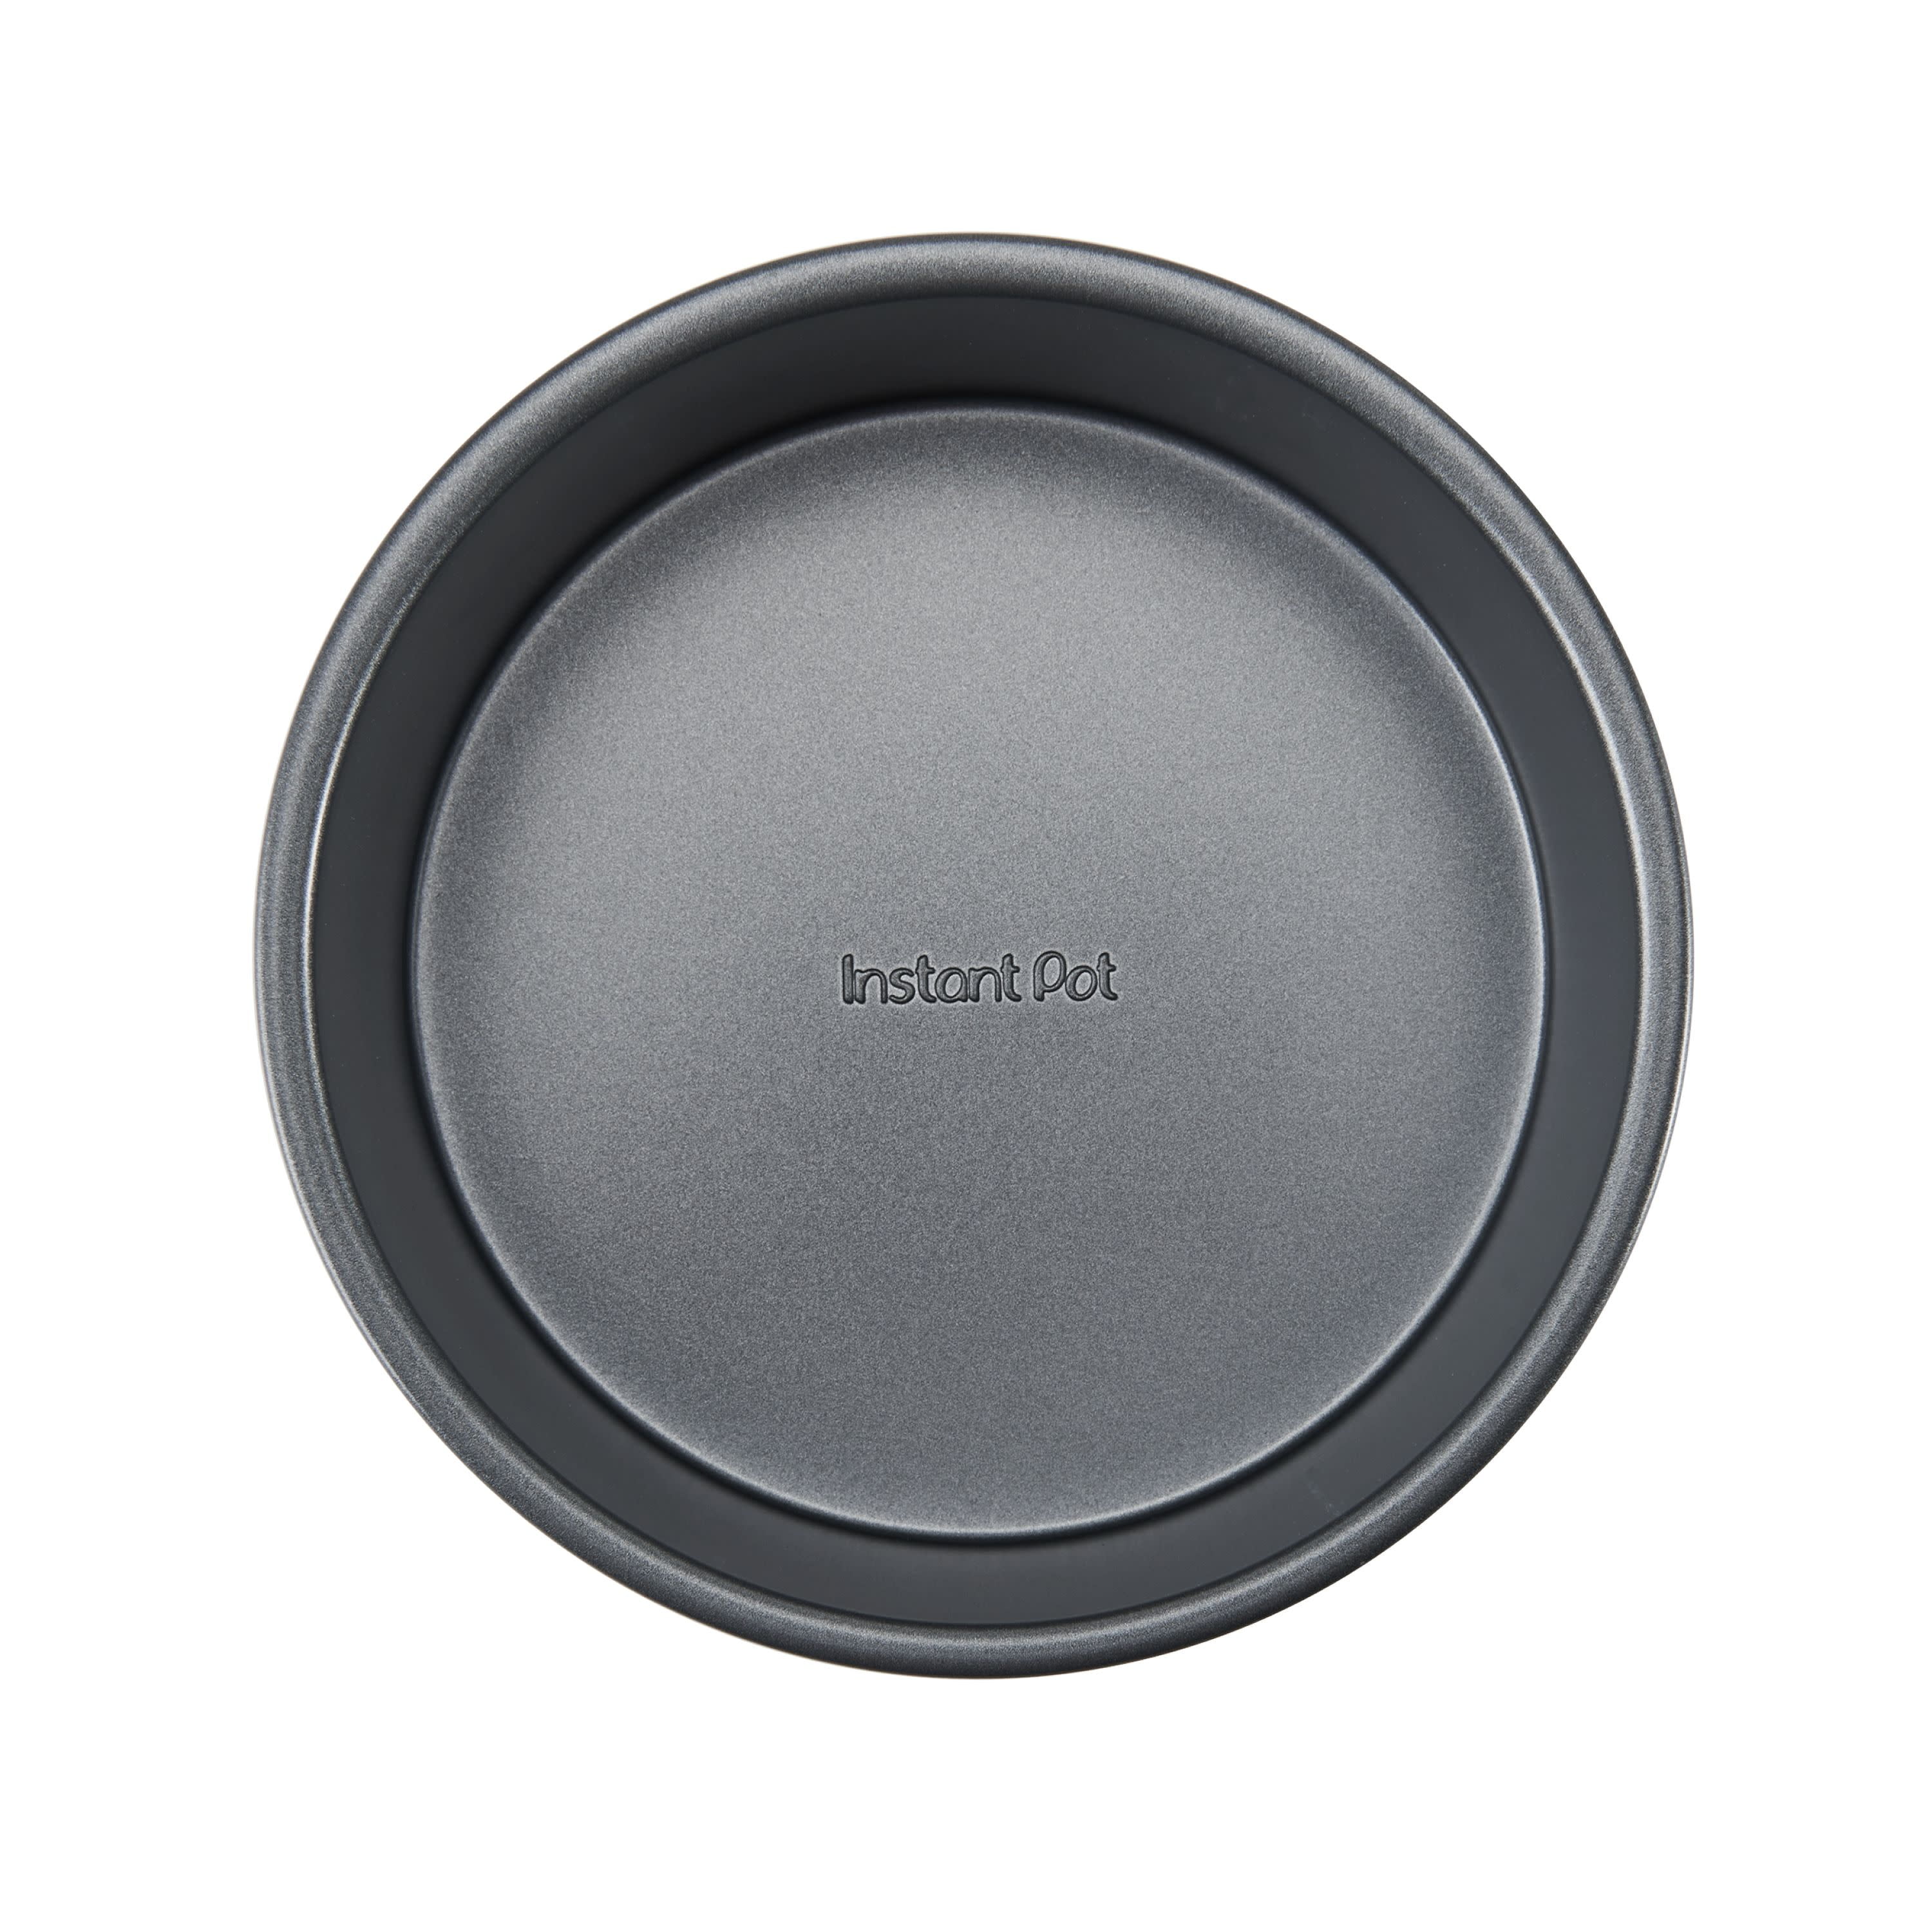 Details about   Round Cake Pan for Instant Pot 7 Inch Deep Baking Cake Pan with Handles 